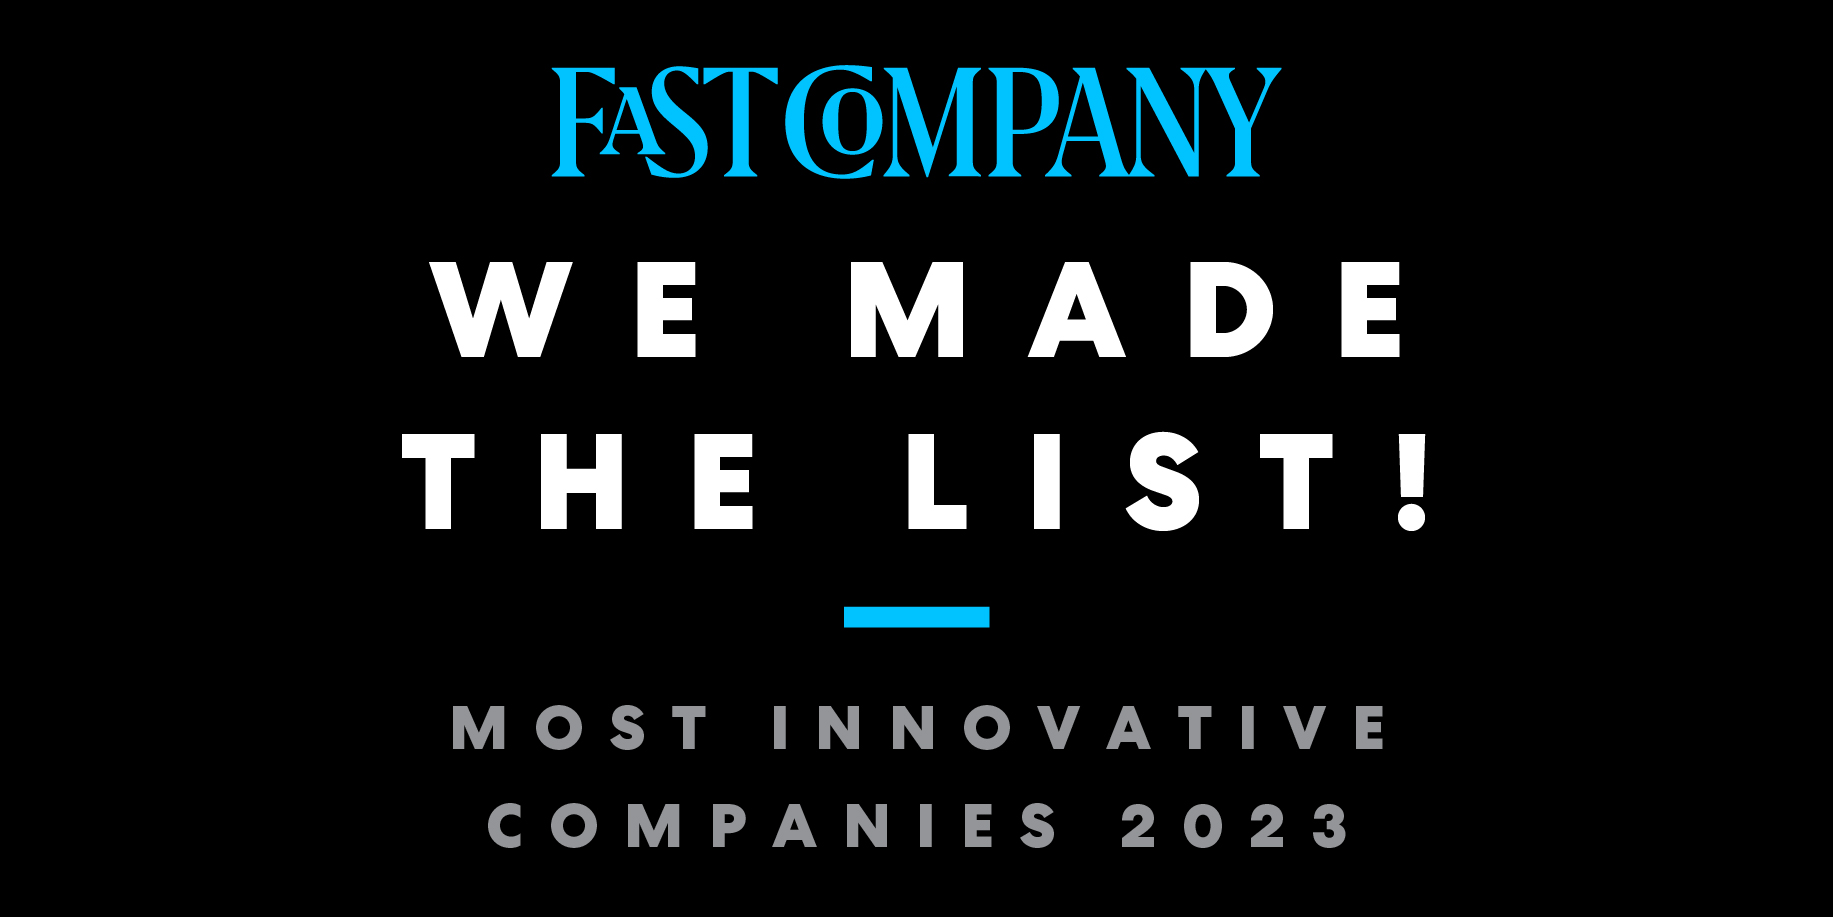 WindESCo Named to Fast Company’s Annual List of the World’s Most Innovative Companies for 2023